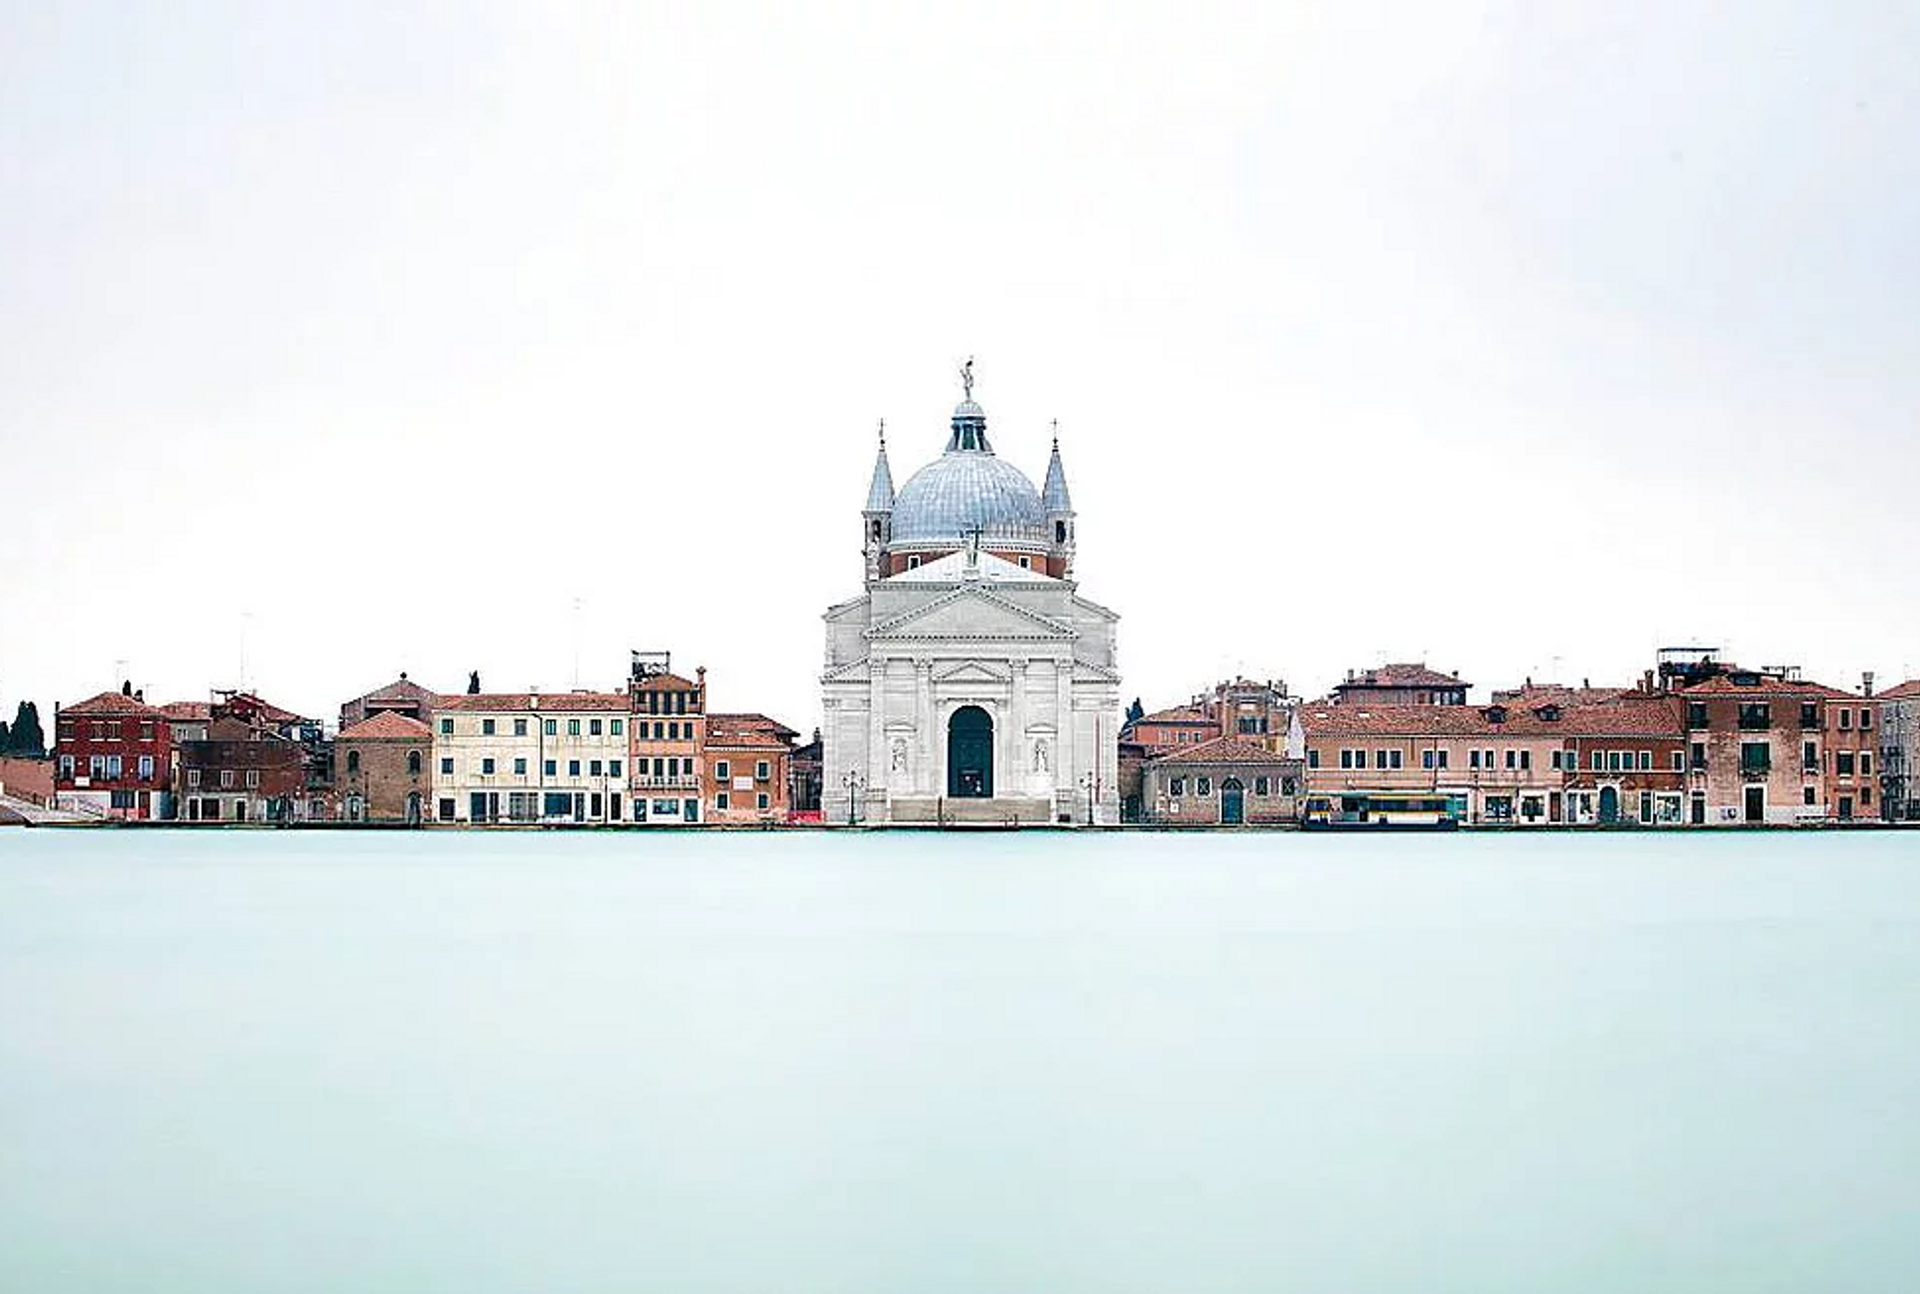 A look at the Giudecca island from afar with Il Redentore church in the centre Courtesy of Giudecca Arts District